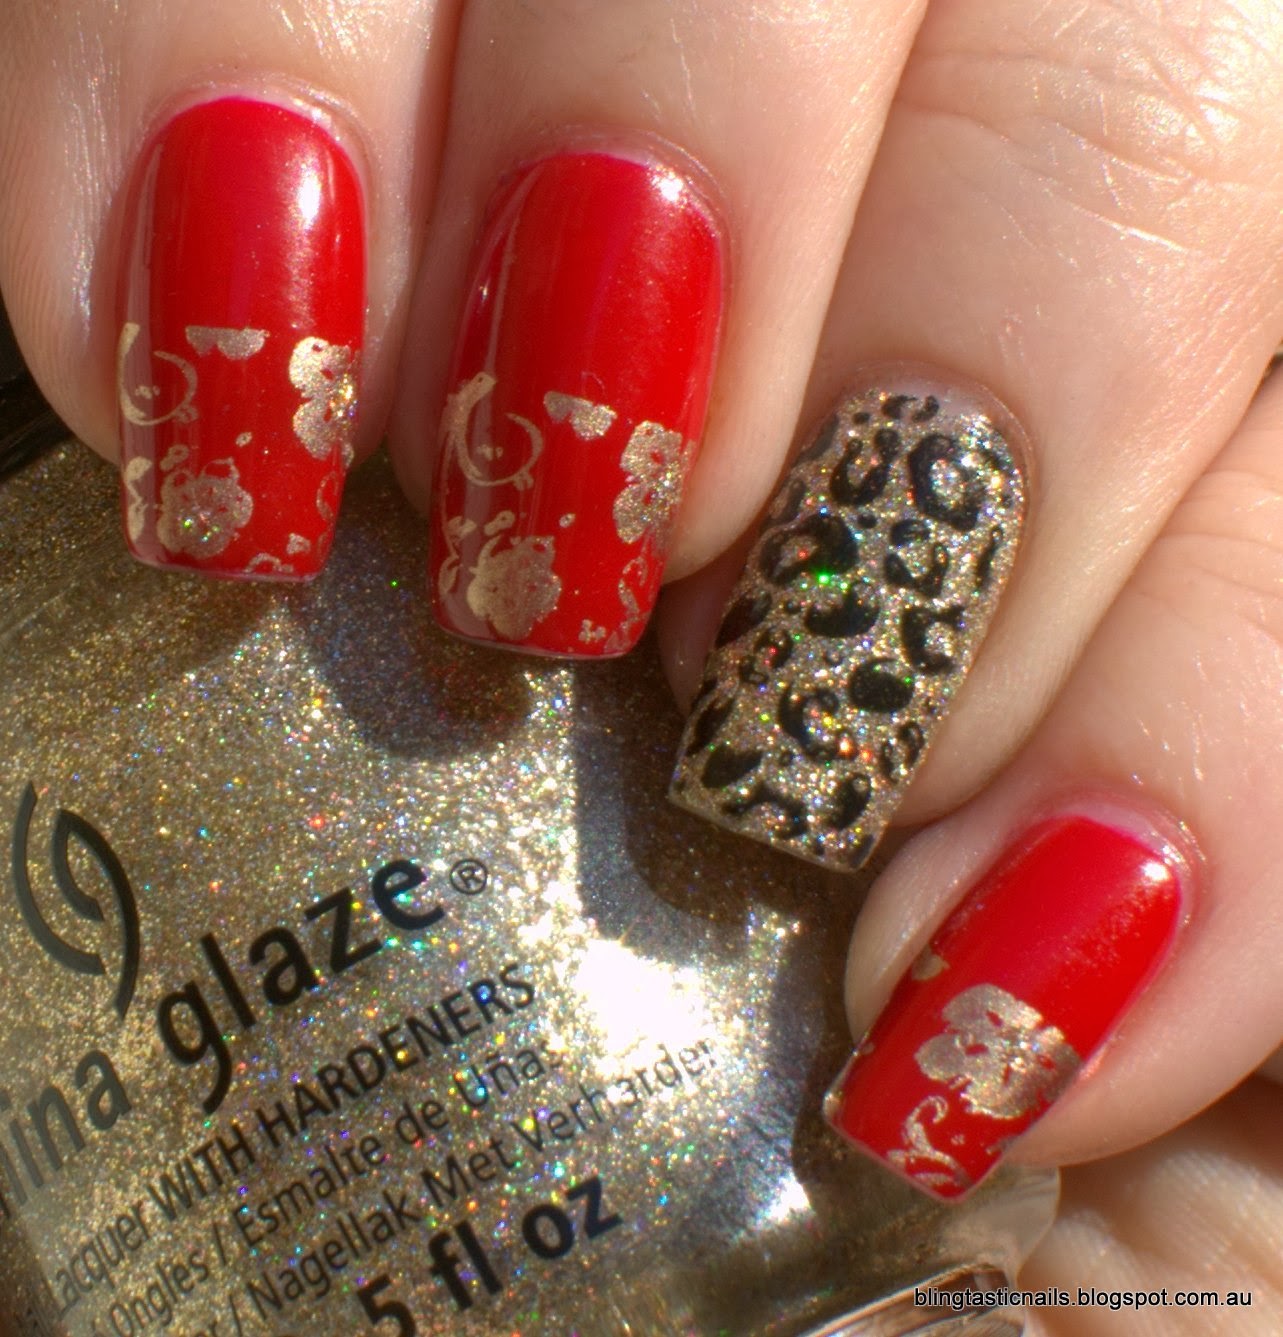 China Glaze I'm Not a Lion with Essence Fame Fatale and stamping